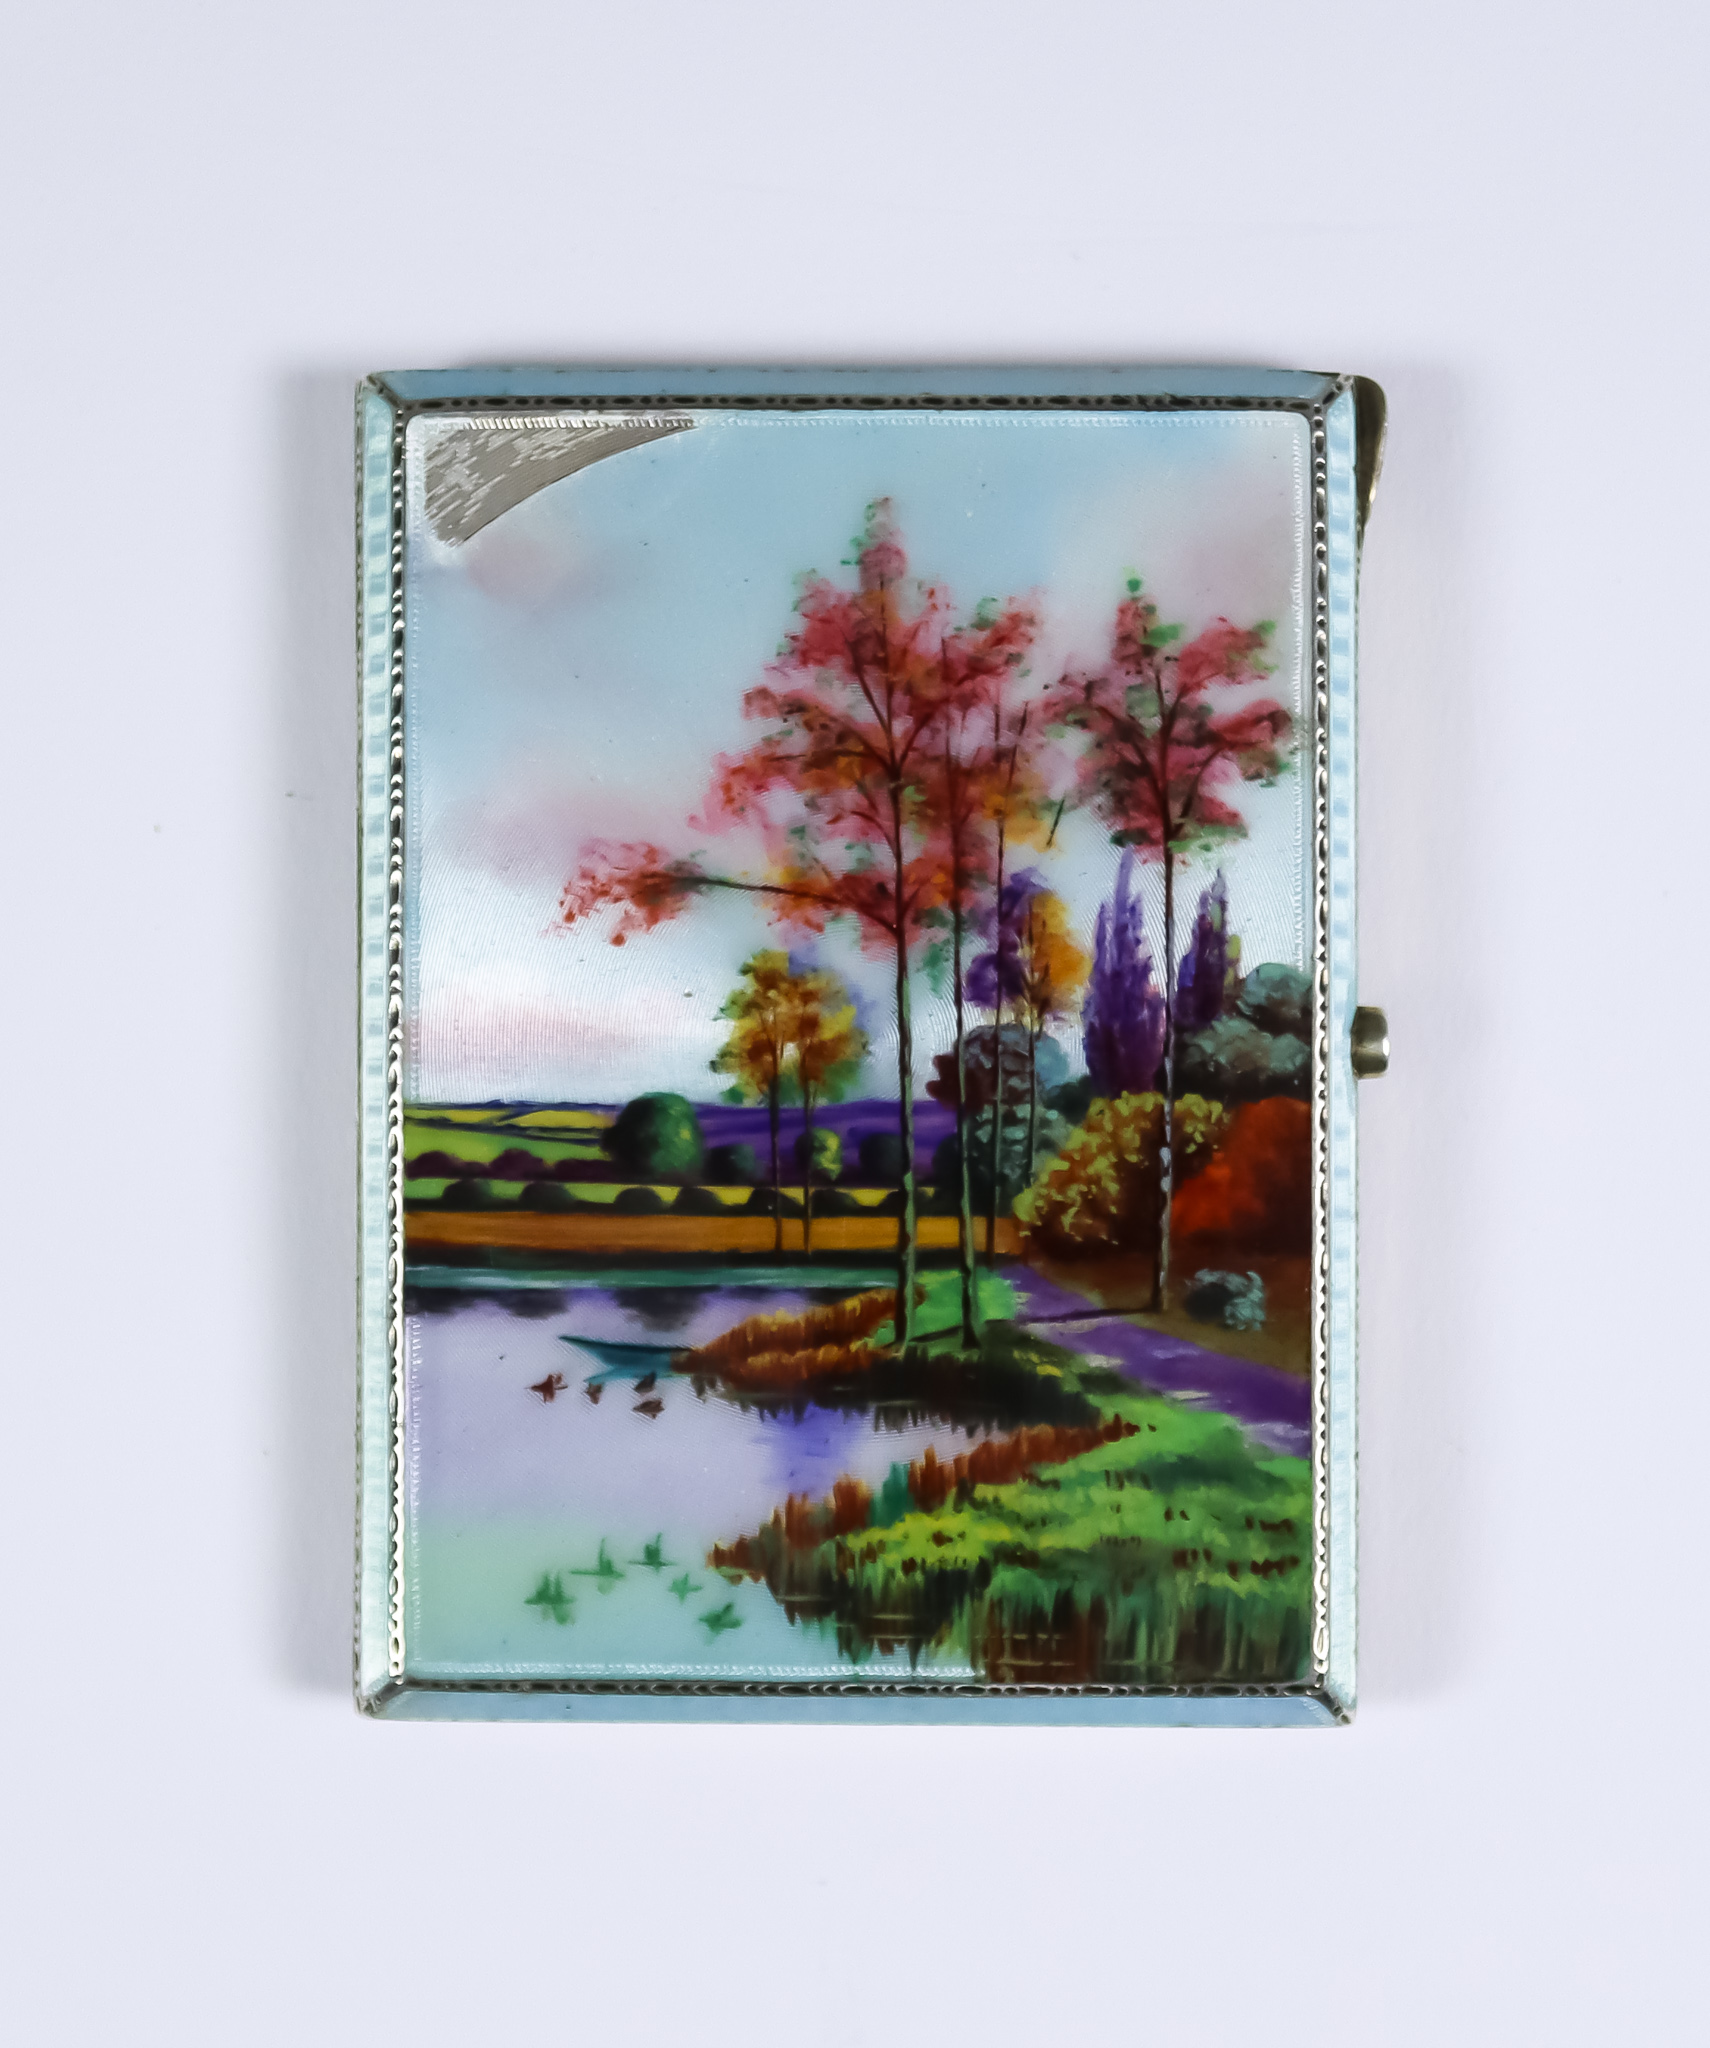 An Early 20th Century Continental Silver, Silver Gilt and Enamel Rectangular Cigarette Case, with